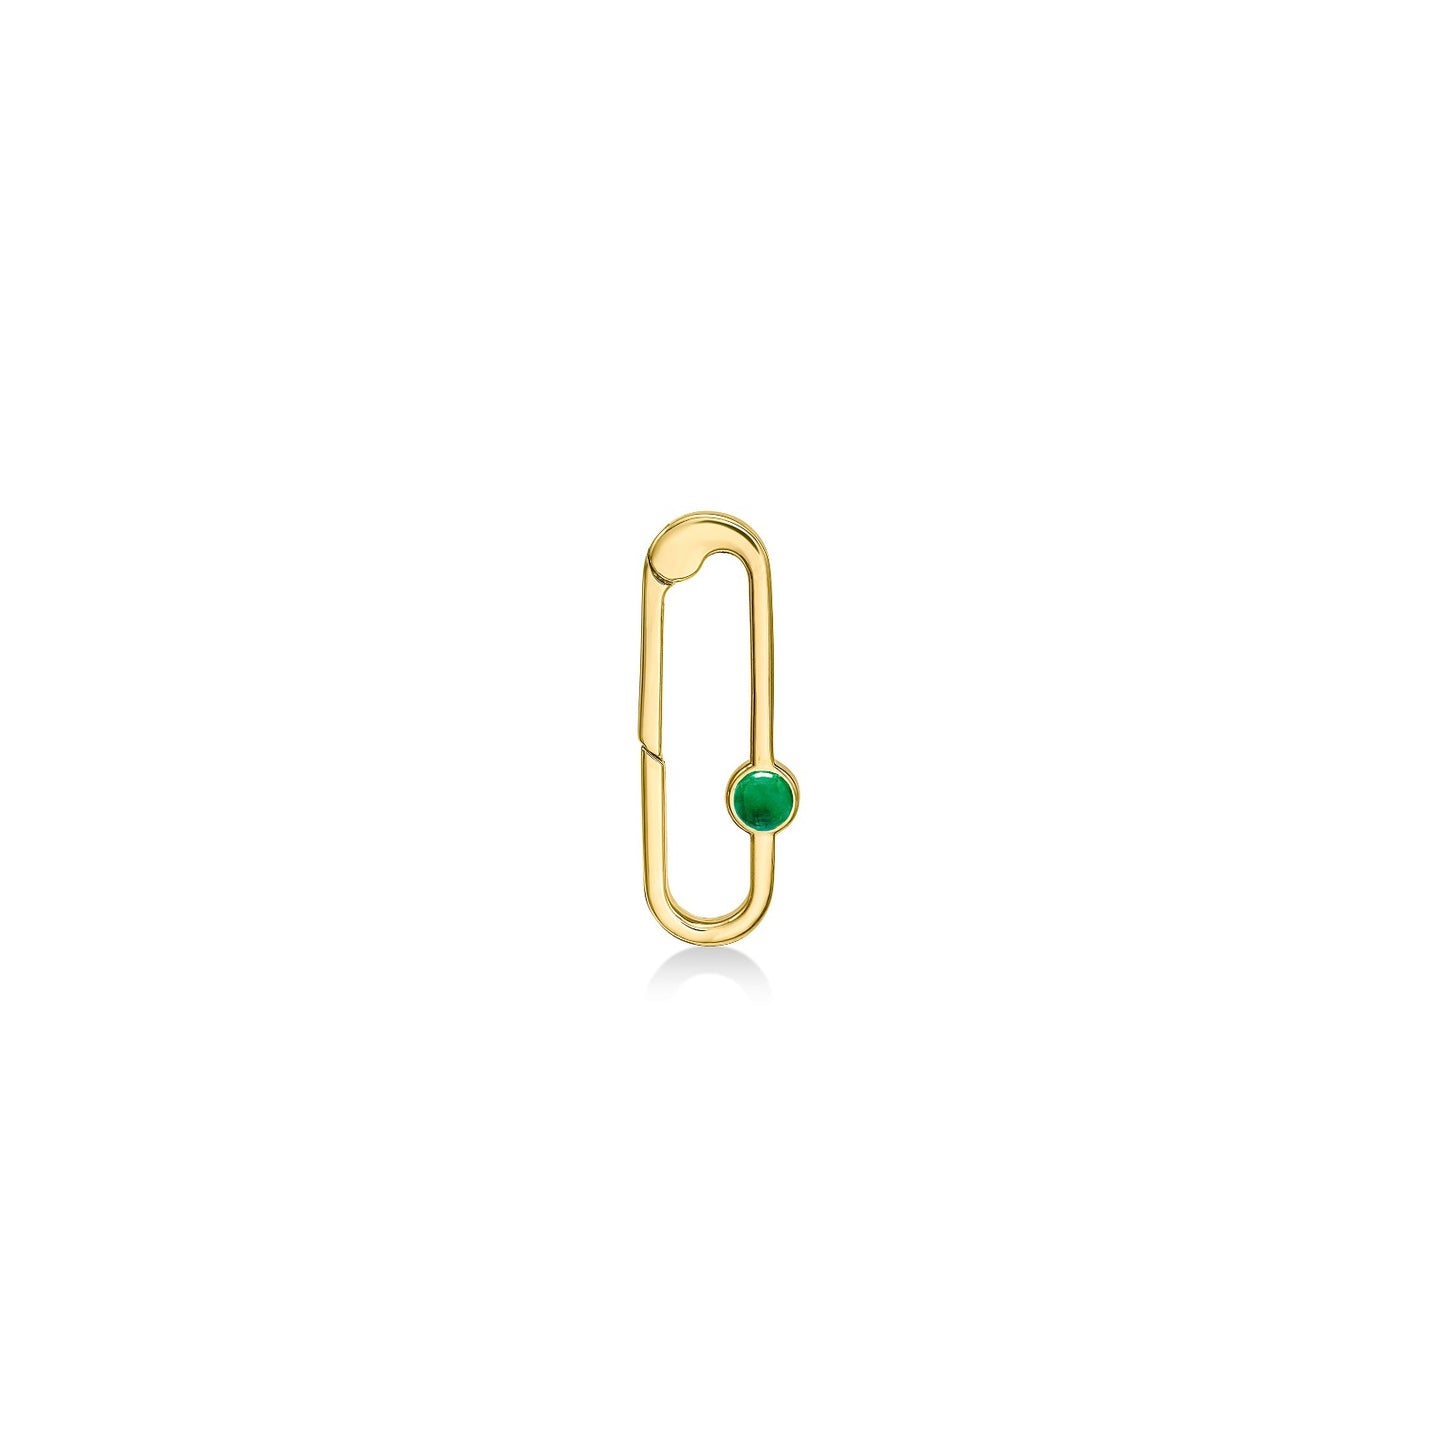 Paperclip charm lock with green onyx